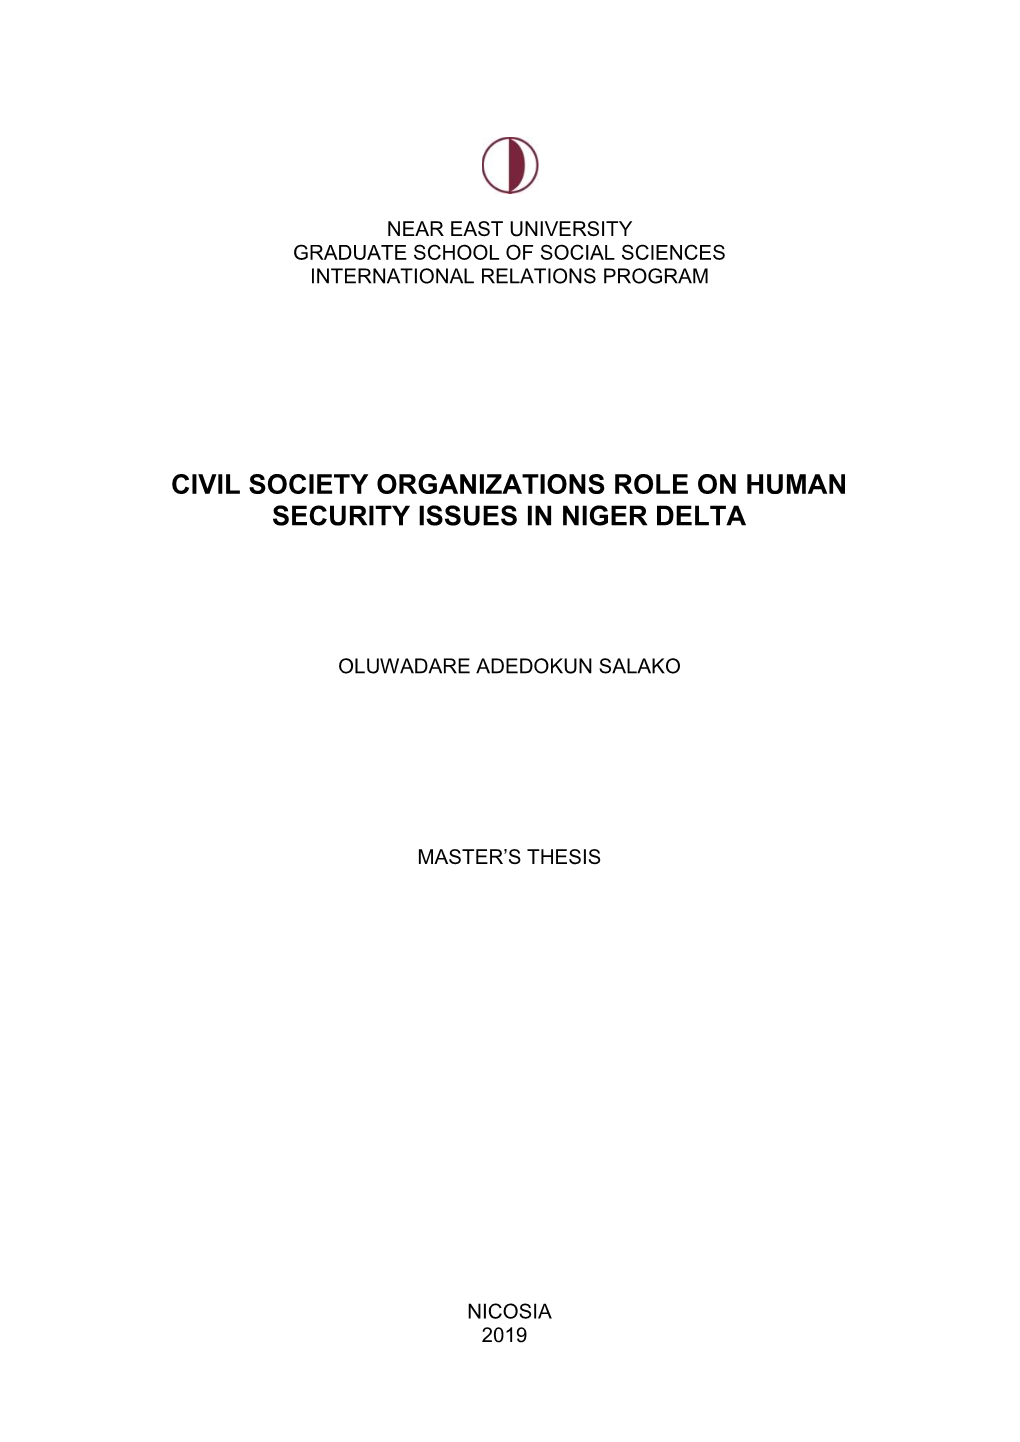 Civil Society Organizations Role on Human Security Issues in Niger Delta